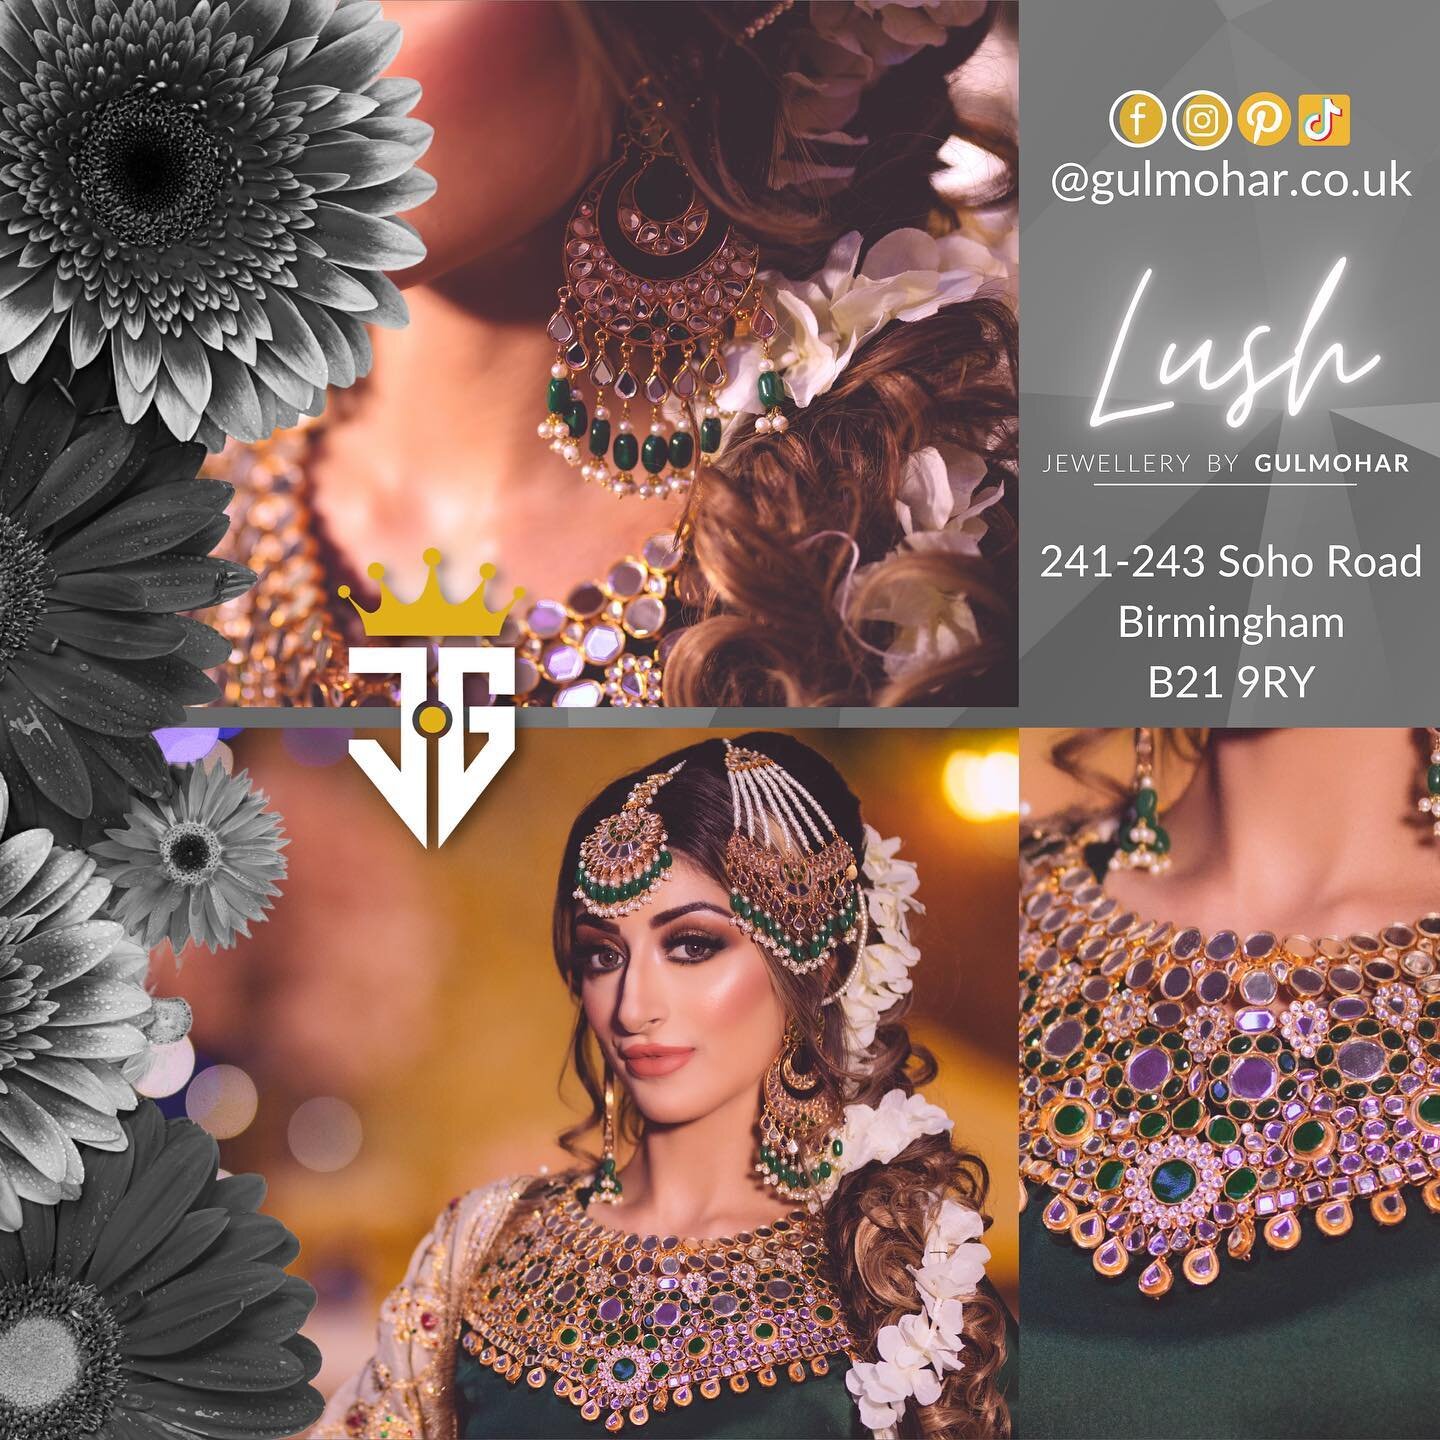 Be unique, be luxury, be Gulmohar! DM us now and order online or visits our Birmingham Boutique.
.
.

Makeup @maysa_nur_mua
Outfit @shop.shagun
Hair &amp; Jewellery setting @sams.sleek.hair
Lashes style mimi @minxy3d
Jewellery @gulmohar.co.uk
Media @